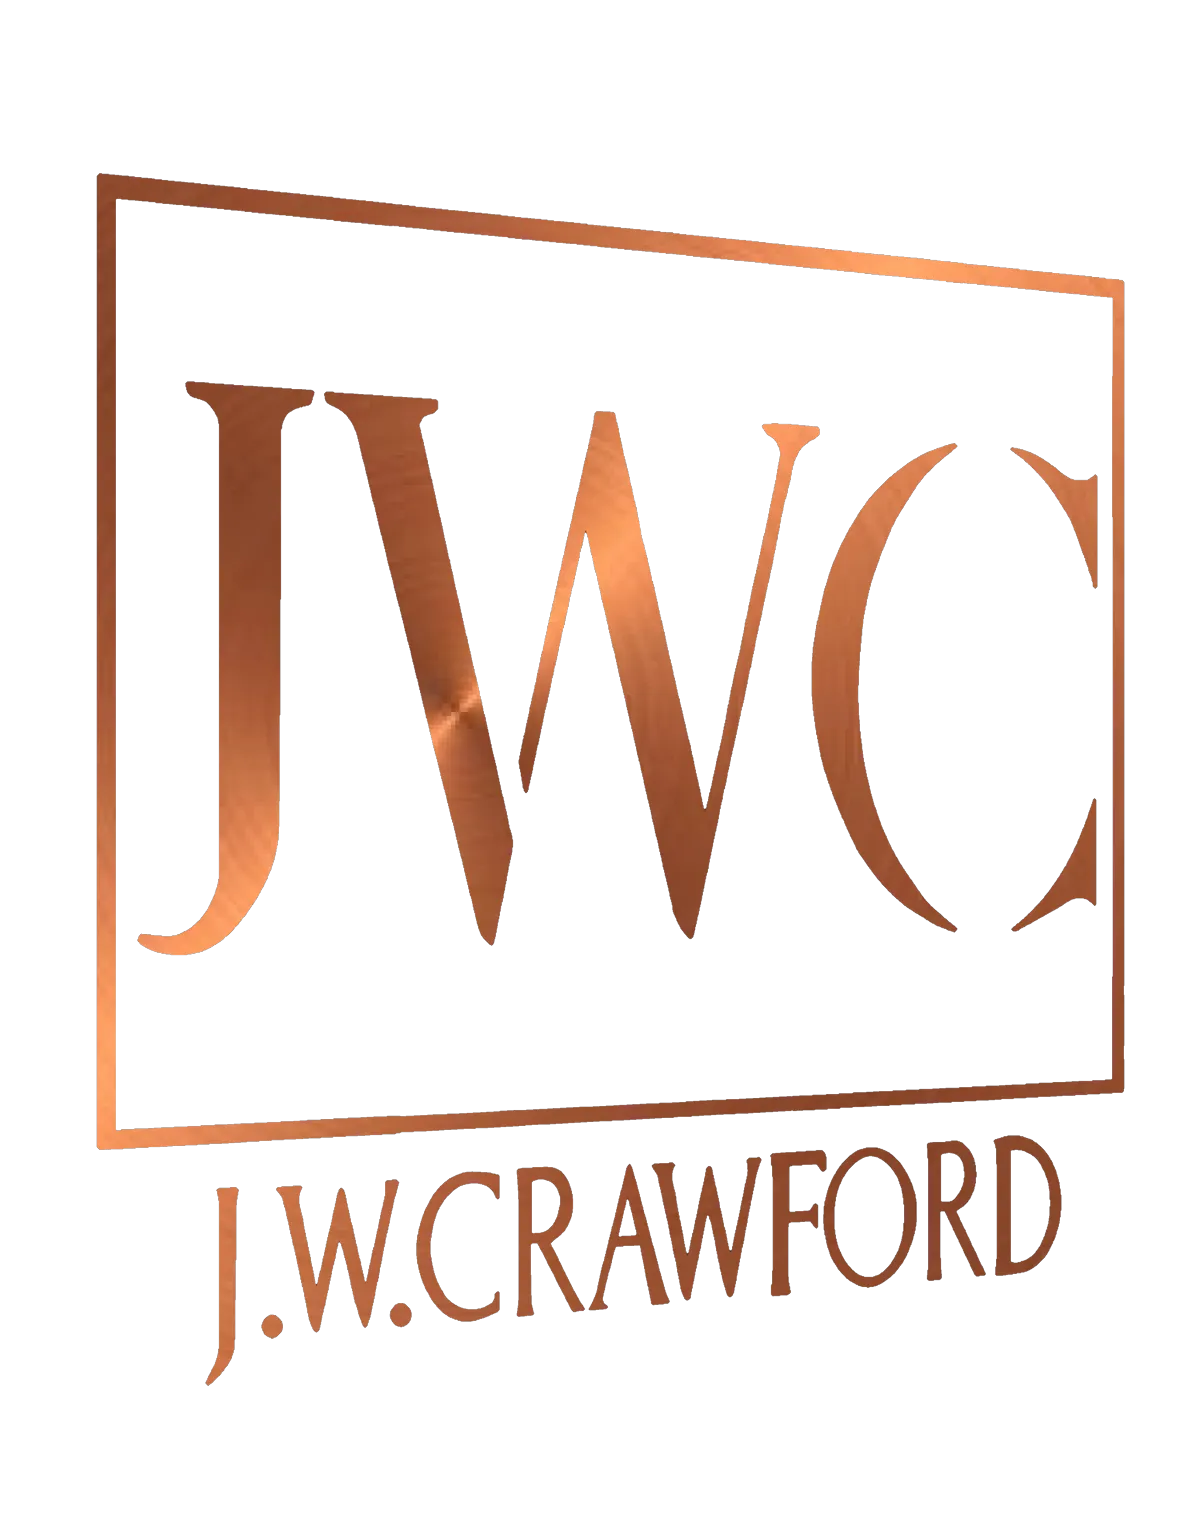 About J.W.Crawford